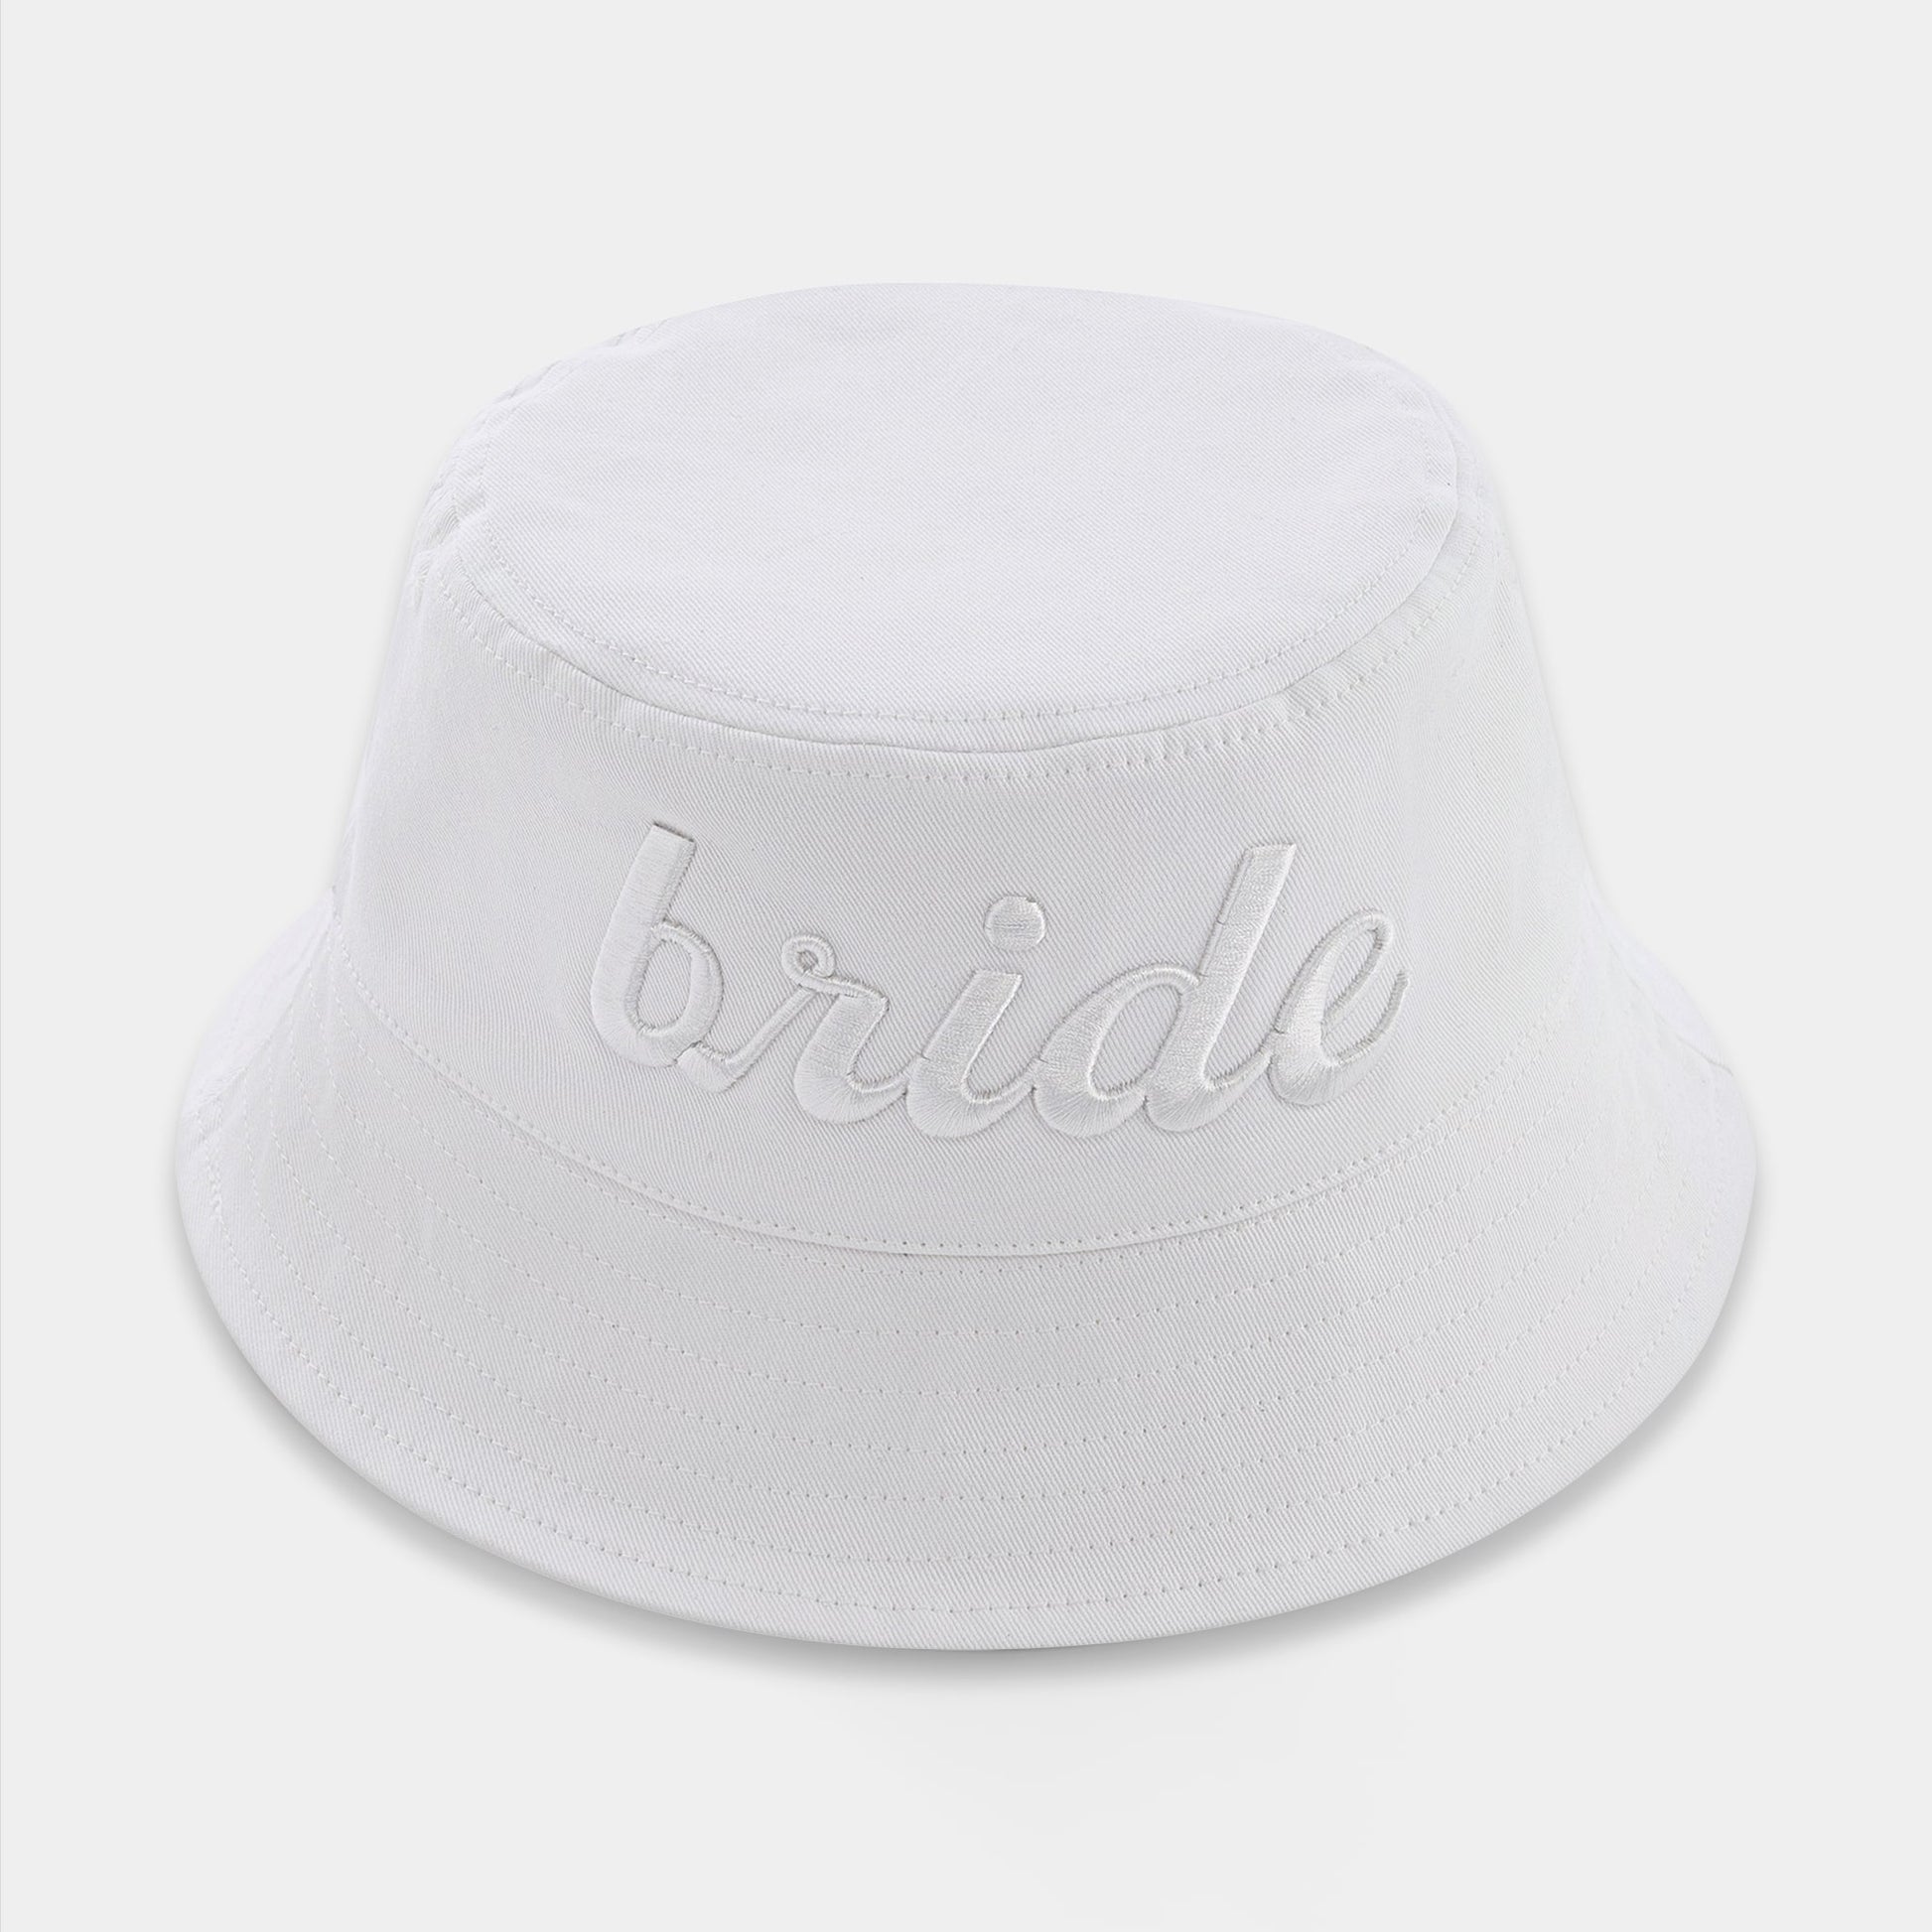 White-on-white embroidered Bride Bucket Hat, made of 100% cotton twill.